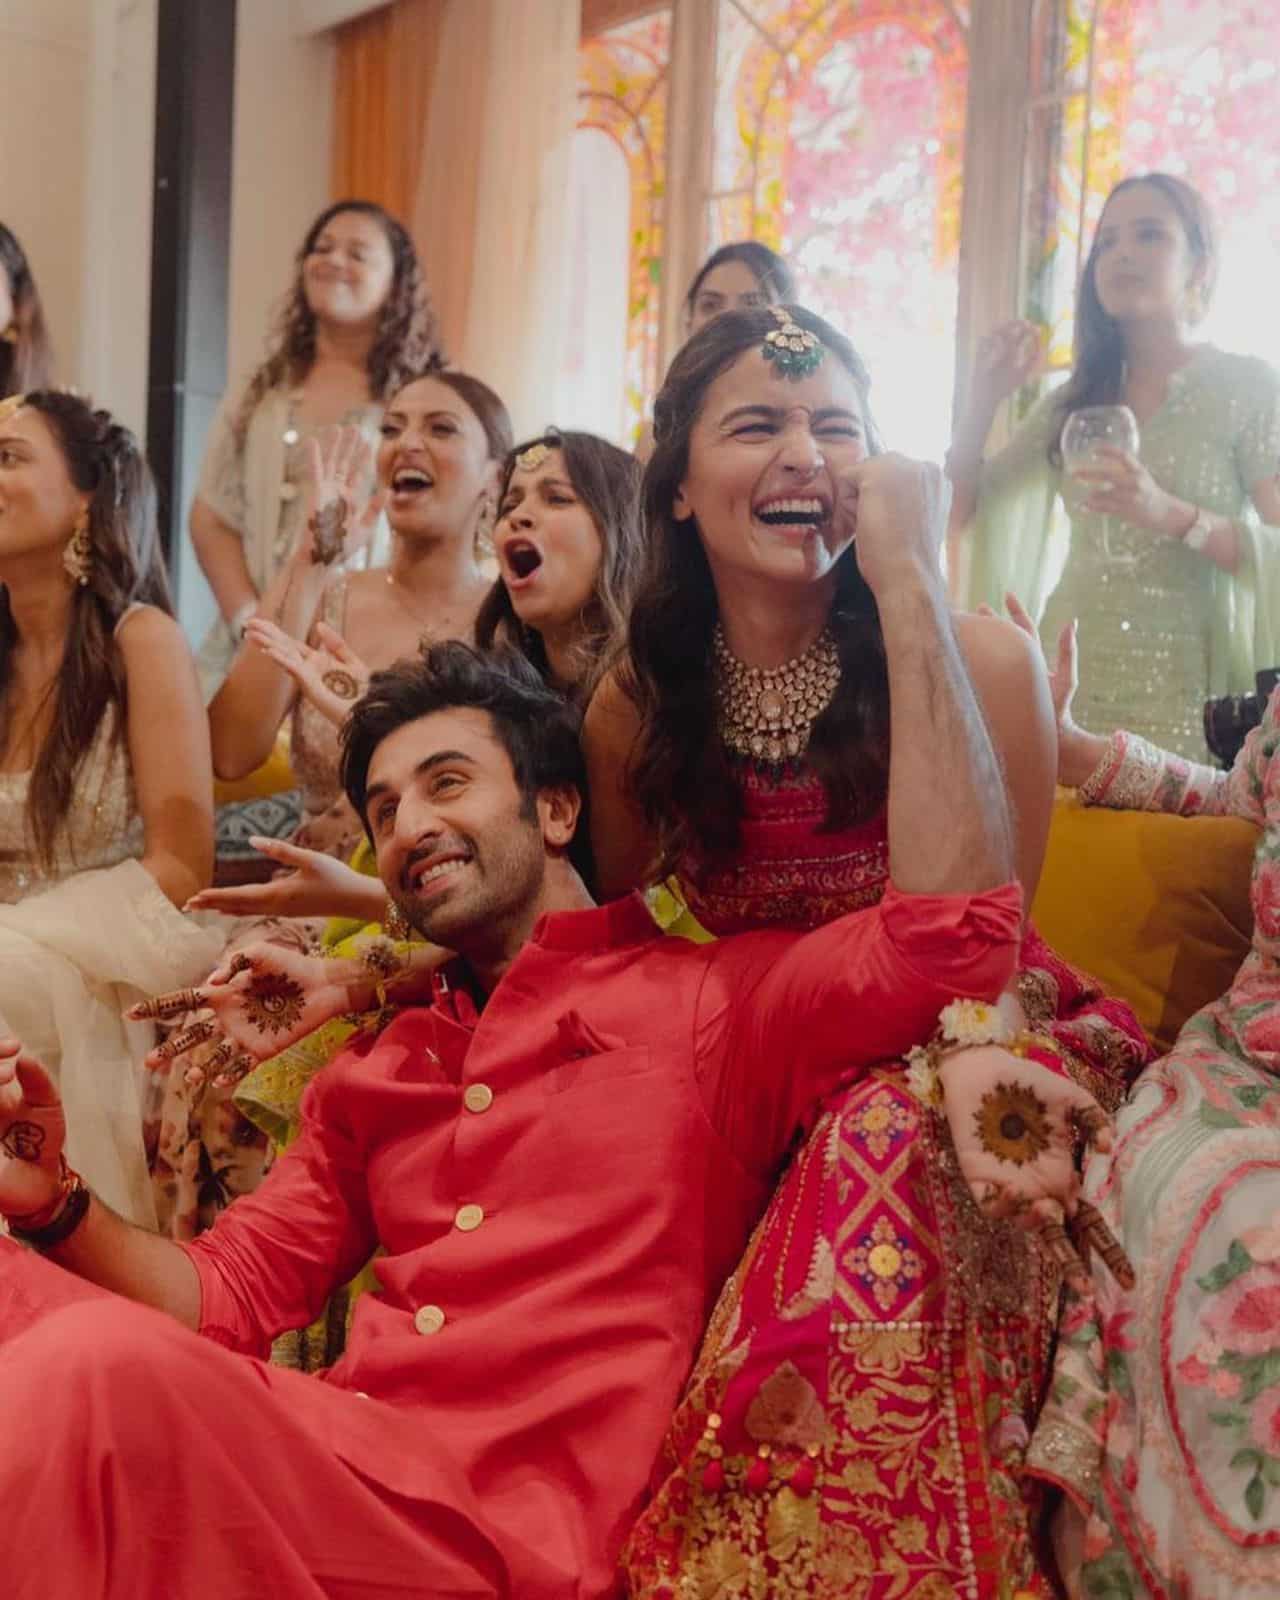 Like a new trendsetter, Alia went with a small Mehendi design on her hands, while Ranbir wrote his wife's name on his palm. Both can be seen sitting together and enjoying the ceremony.